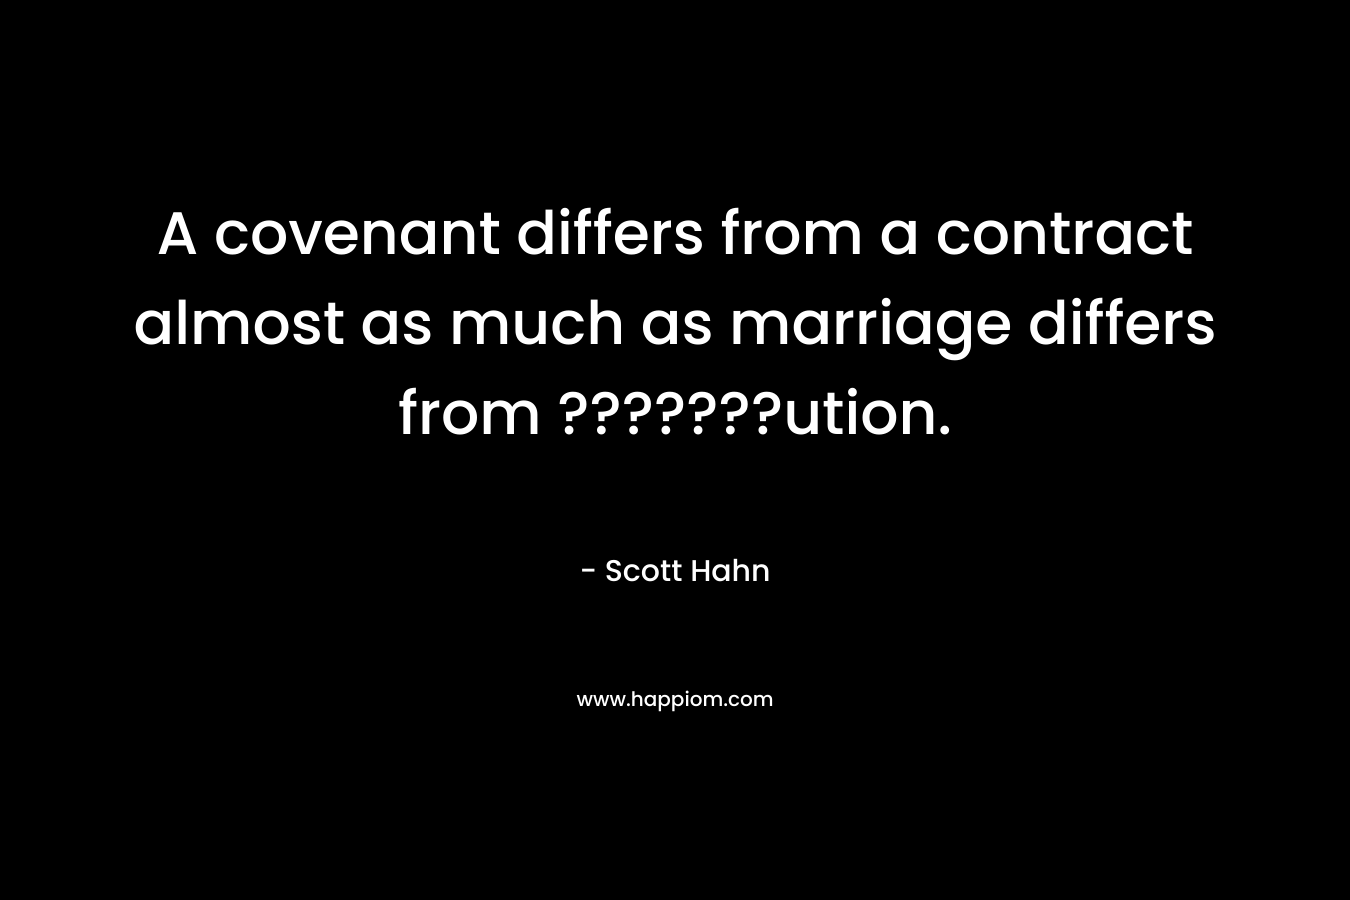 A covenant differs from a contract almost as much as marriage differs from ???????ution.